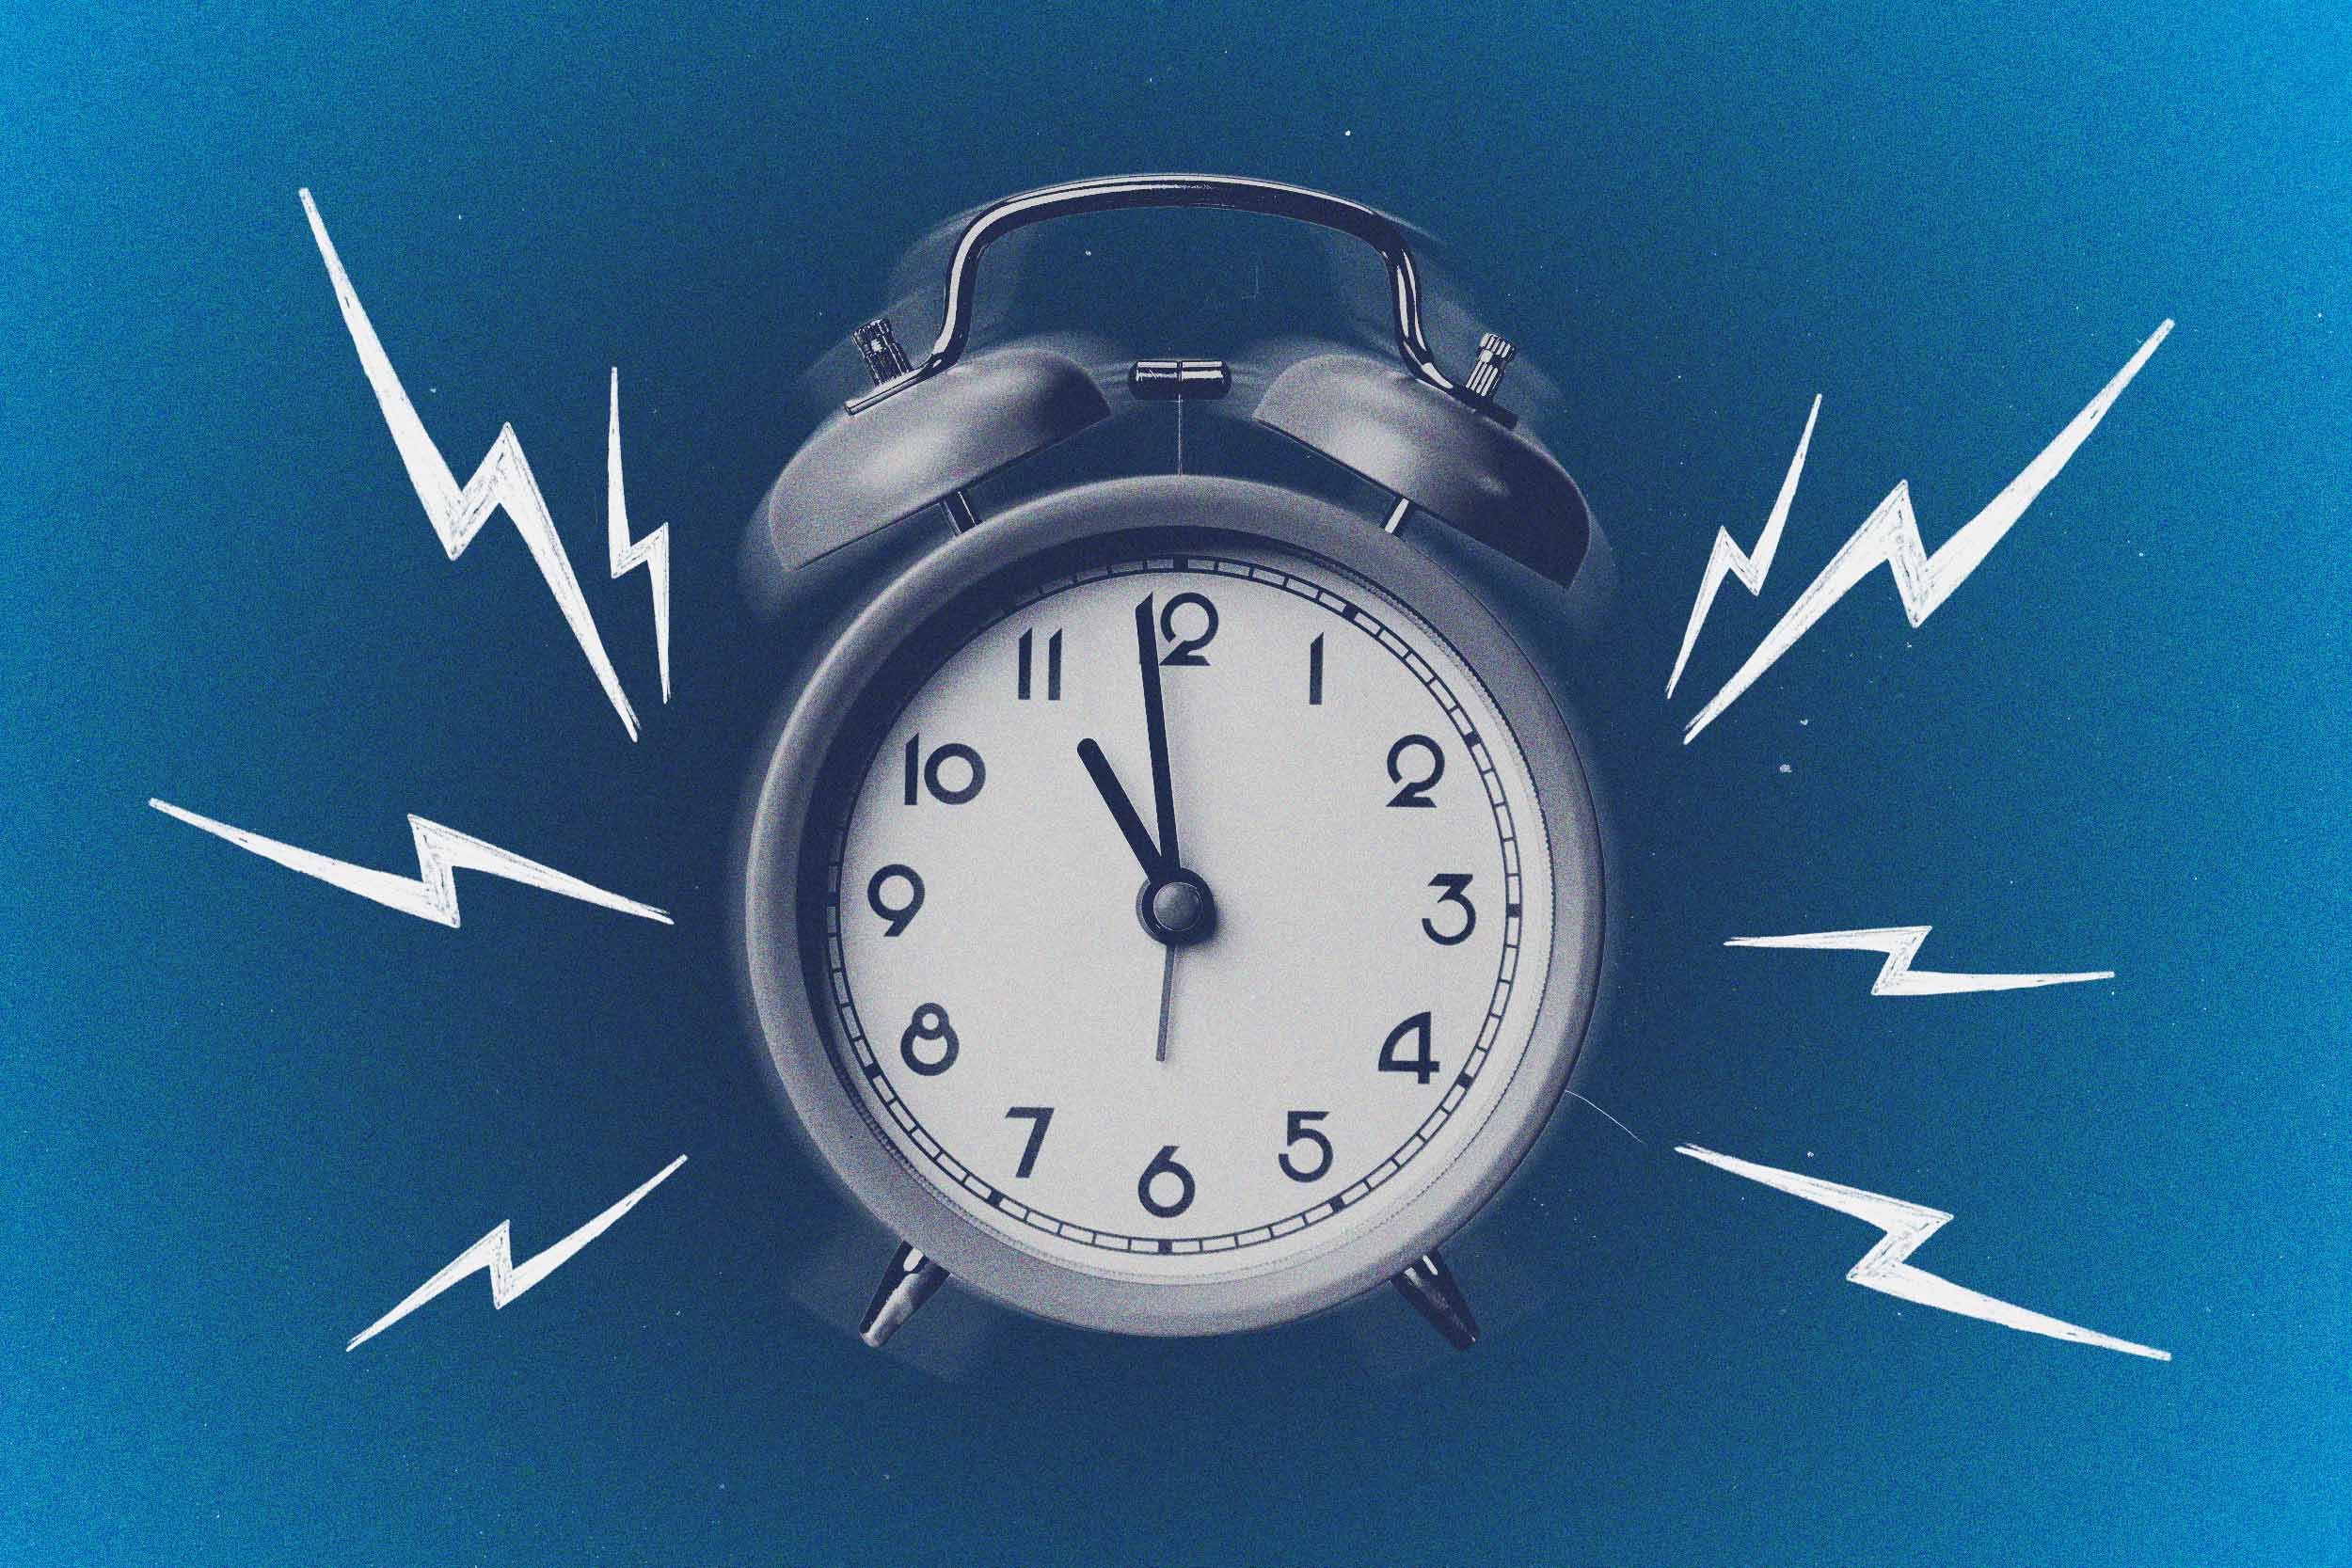 Alarm clock with lightning bolts indicating sound